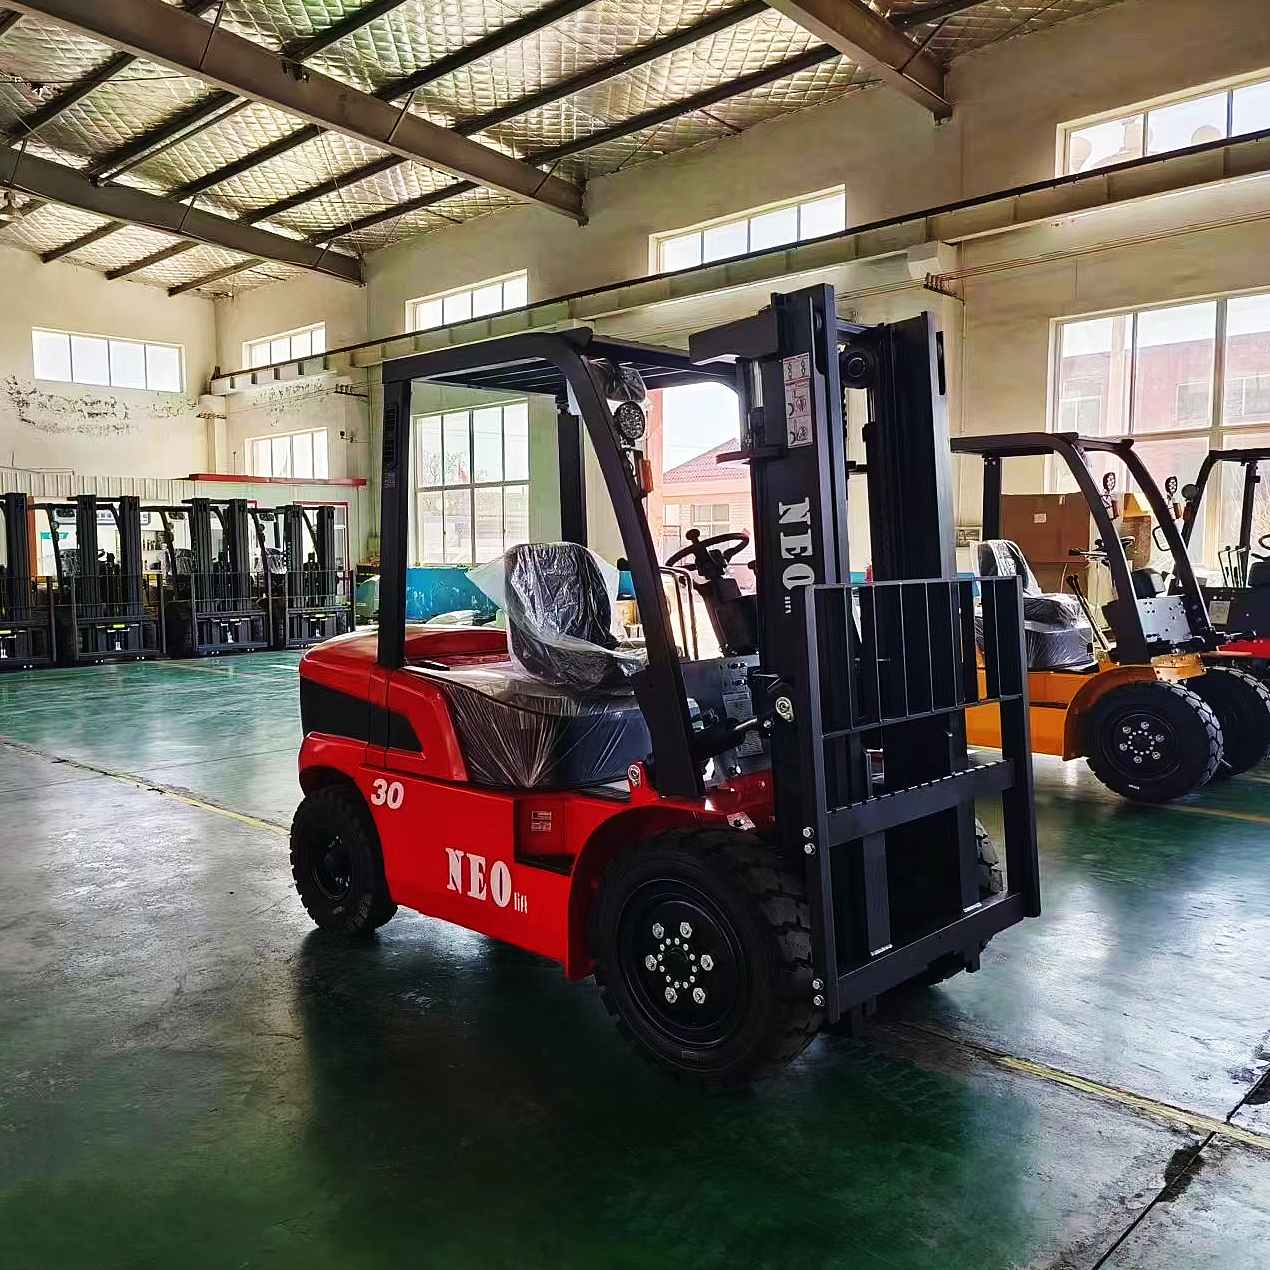 What is the best type of forklifts? Oil forklift, gas forklift or electric forklift?